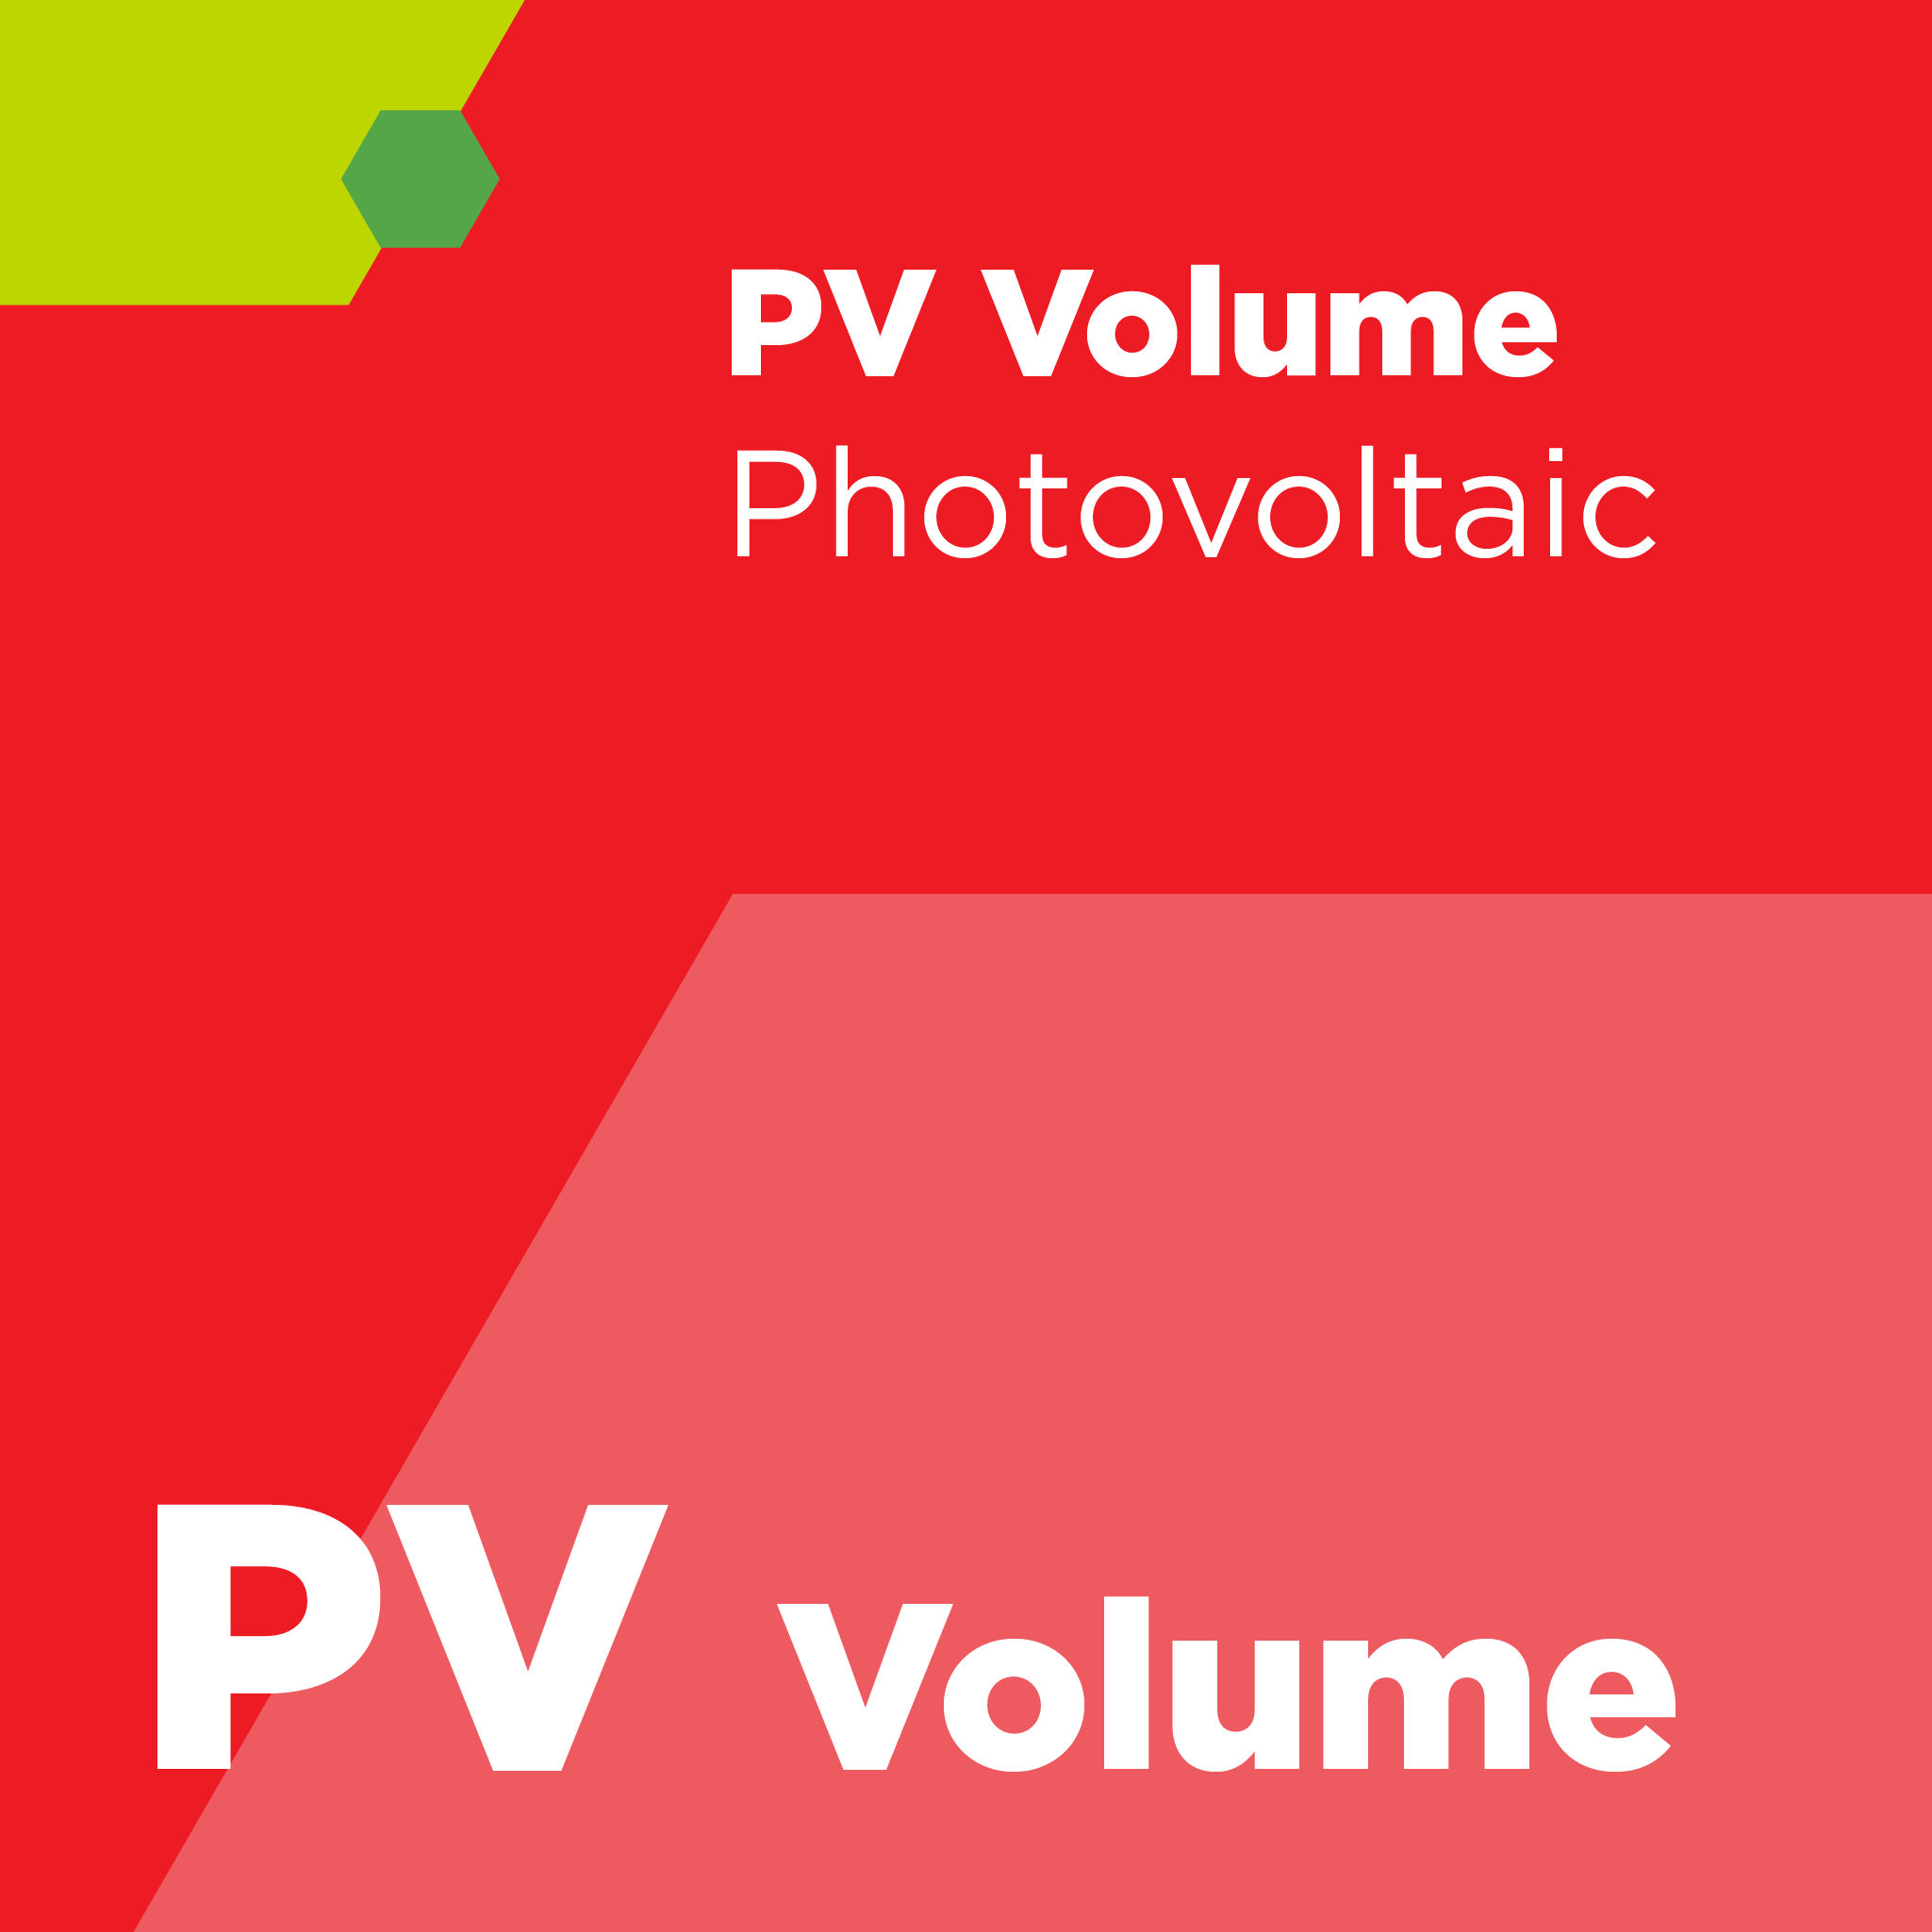 PV01200 - SEMI PV12 - Specification for Phosphoric Acid Used in Photovoltaic Applications